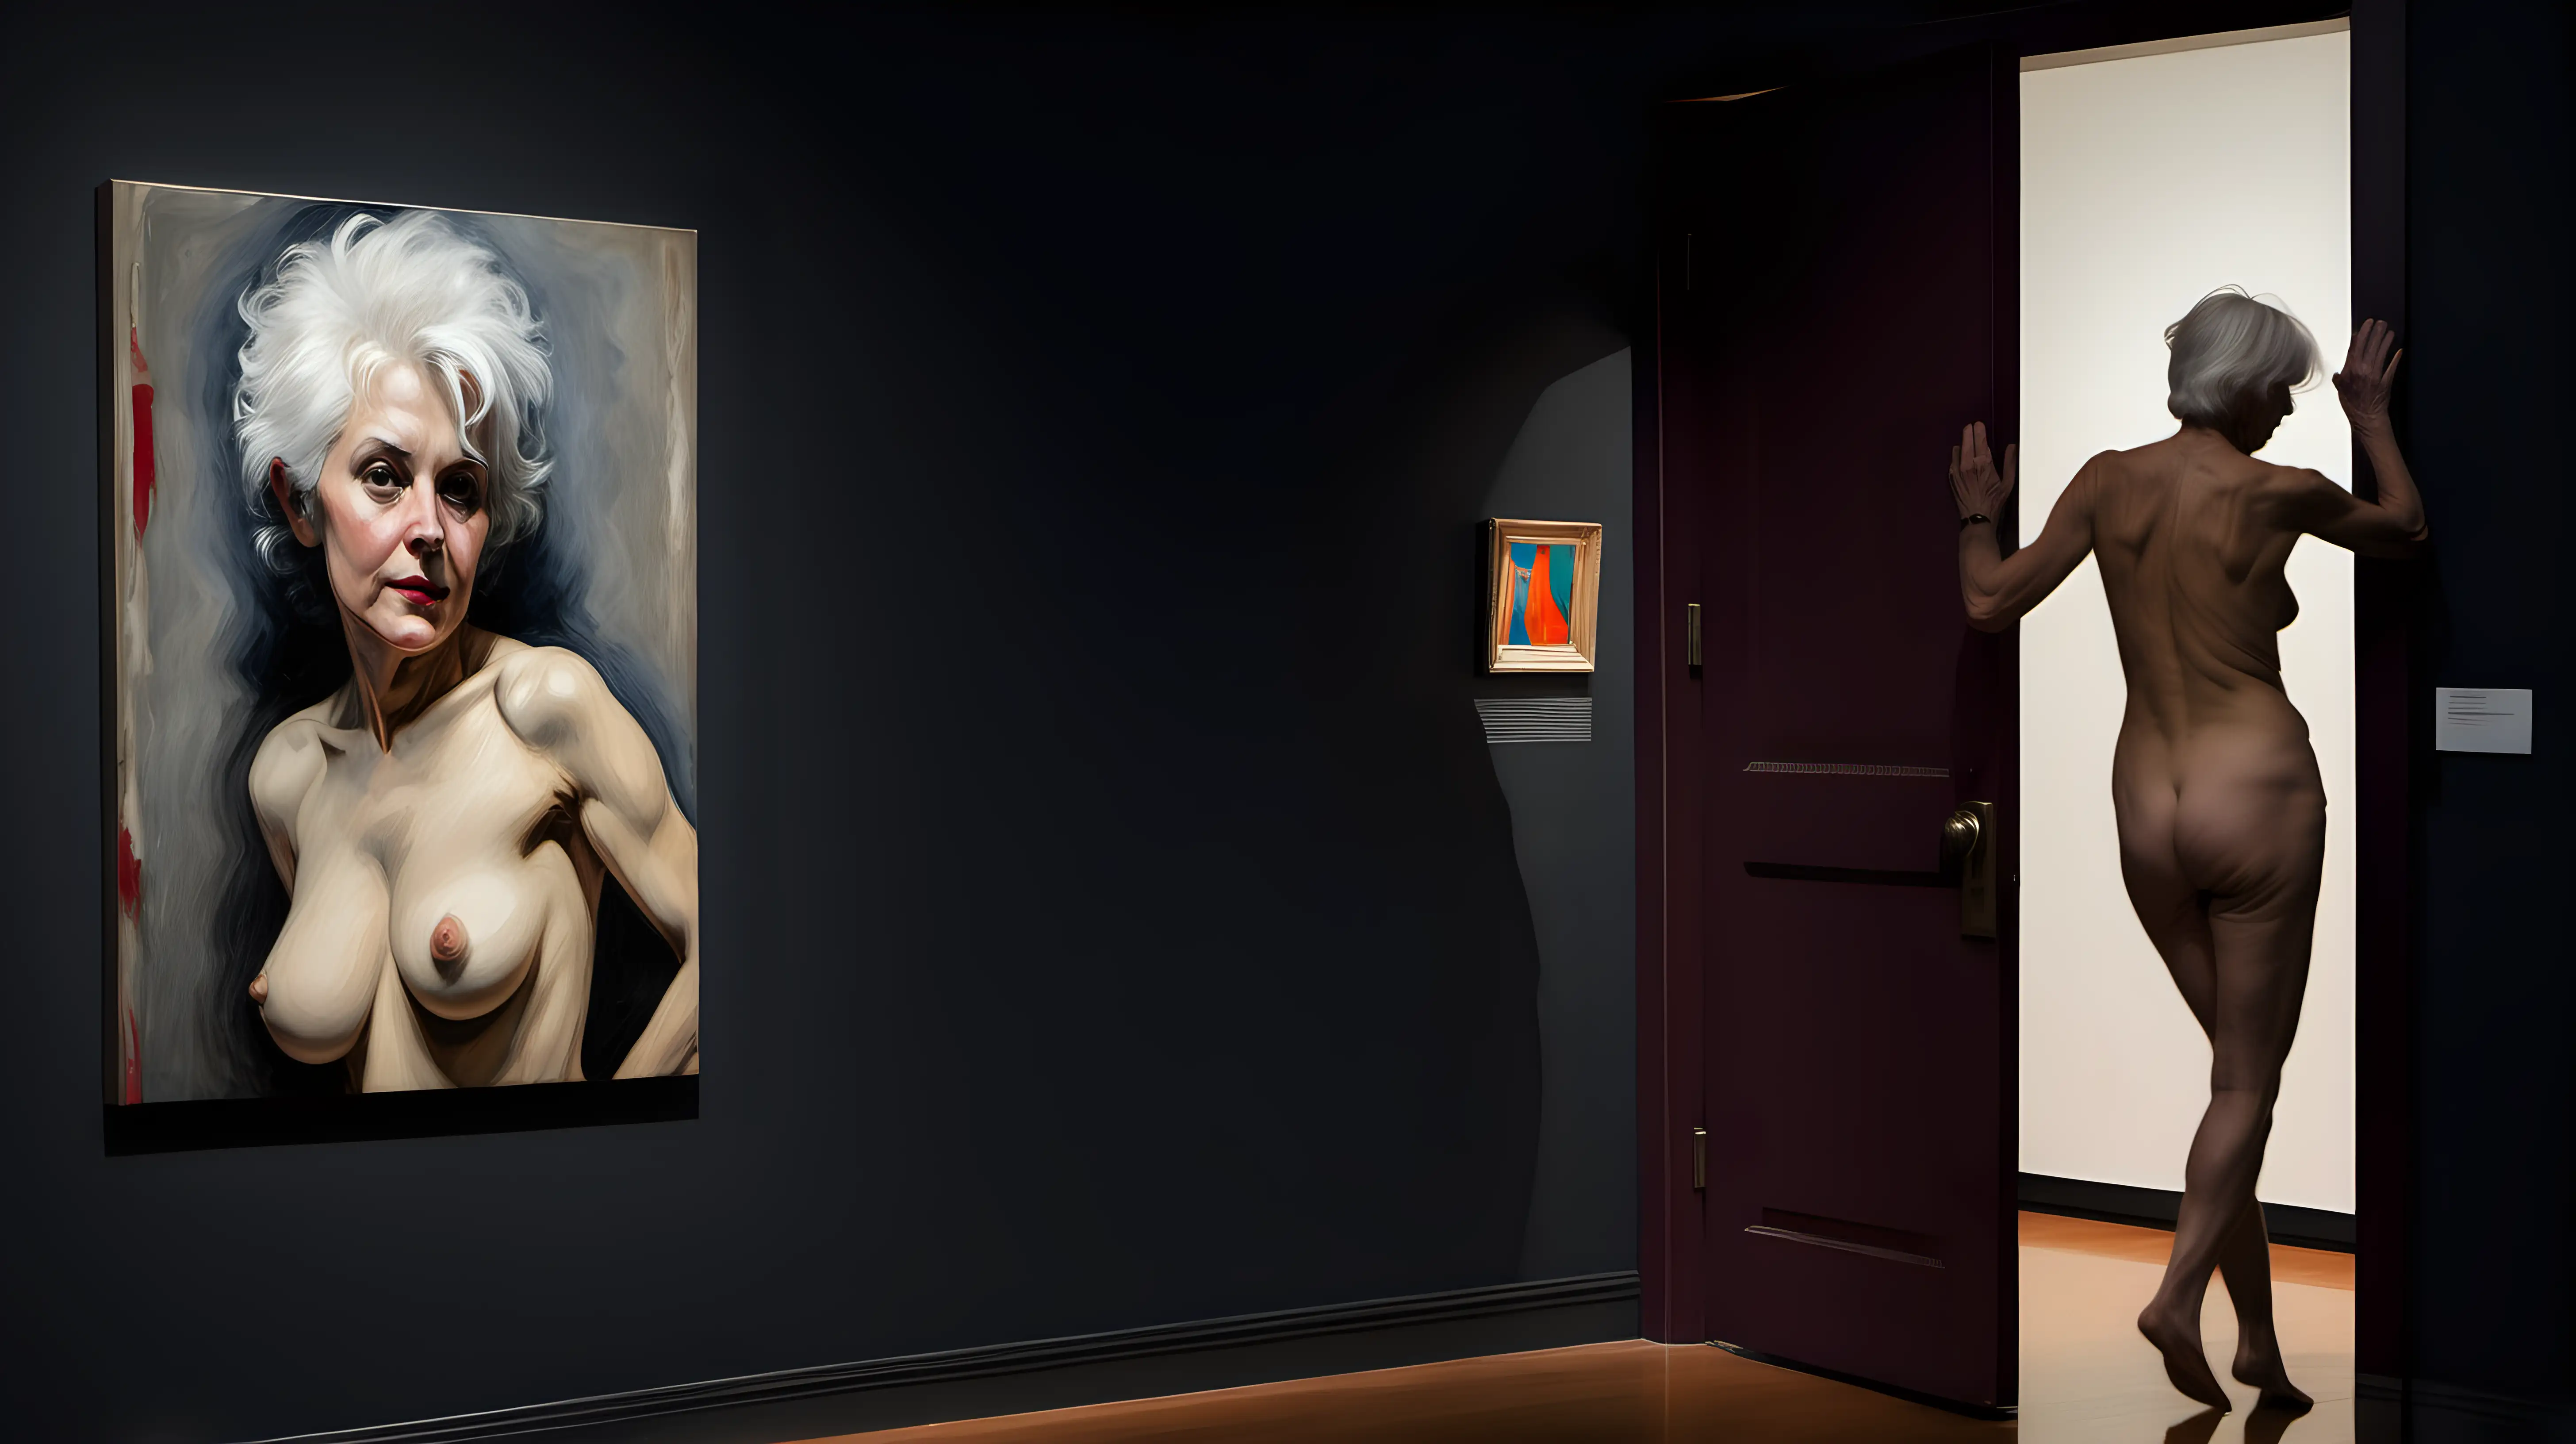 Middle aged white haired Nude wearing scarf sneaking through door into dark background art museum gallery with one small painting on wall